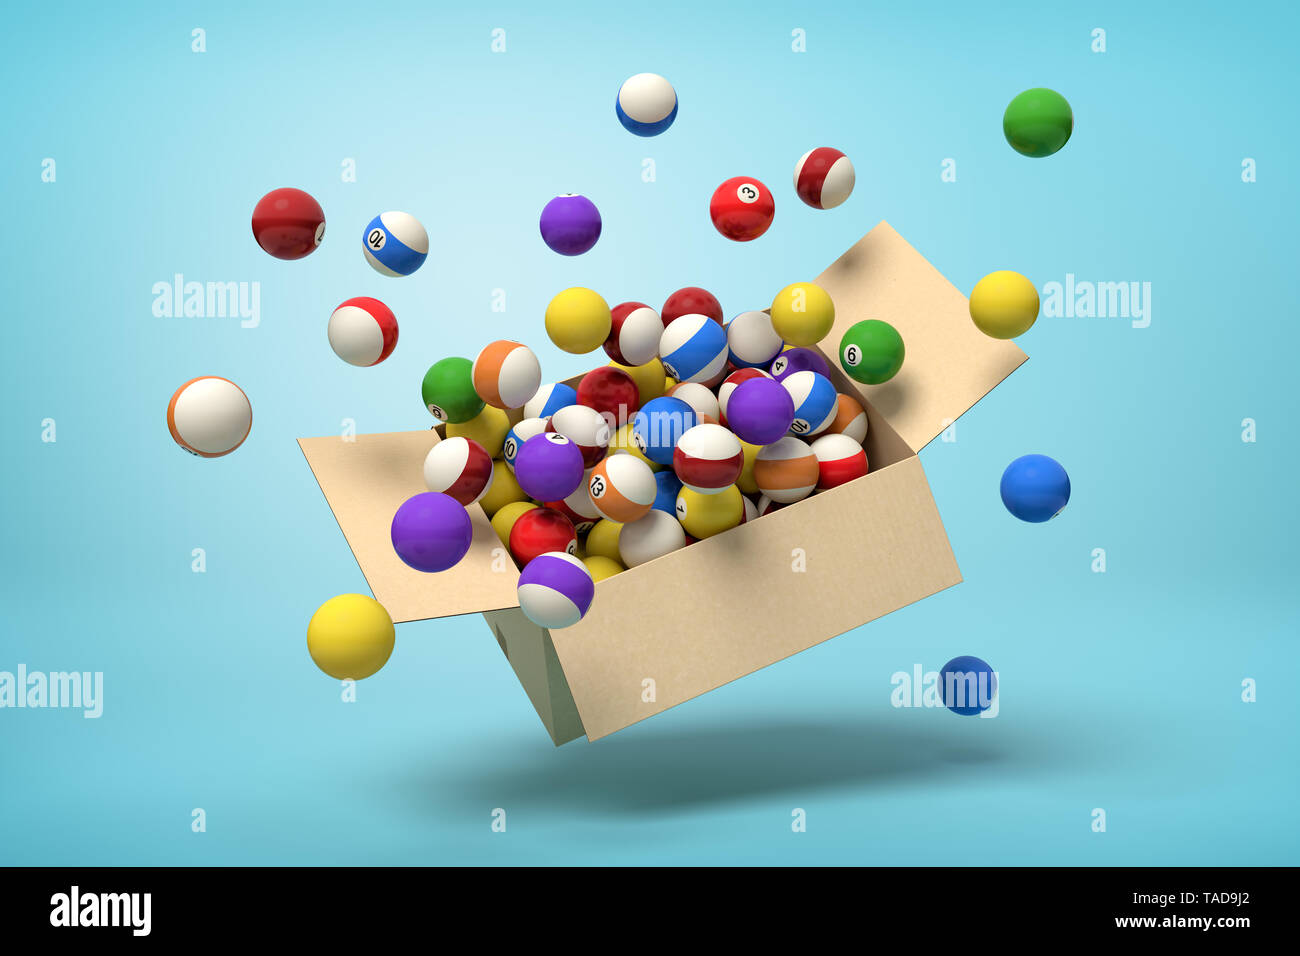 3d rendering of cardboard box in air full of colorful snooker balls which are flying out and floating outside on blue background. Stock Photo